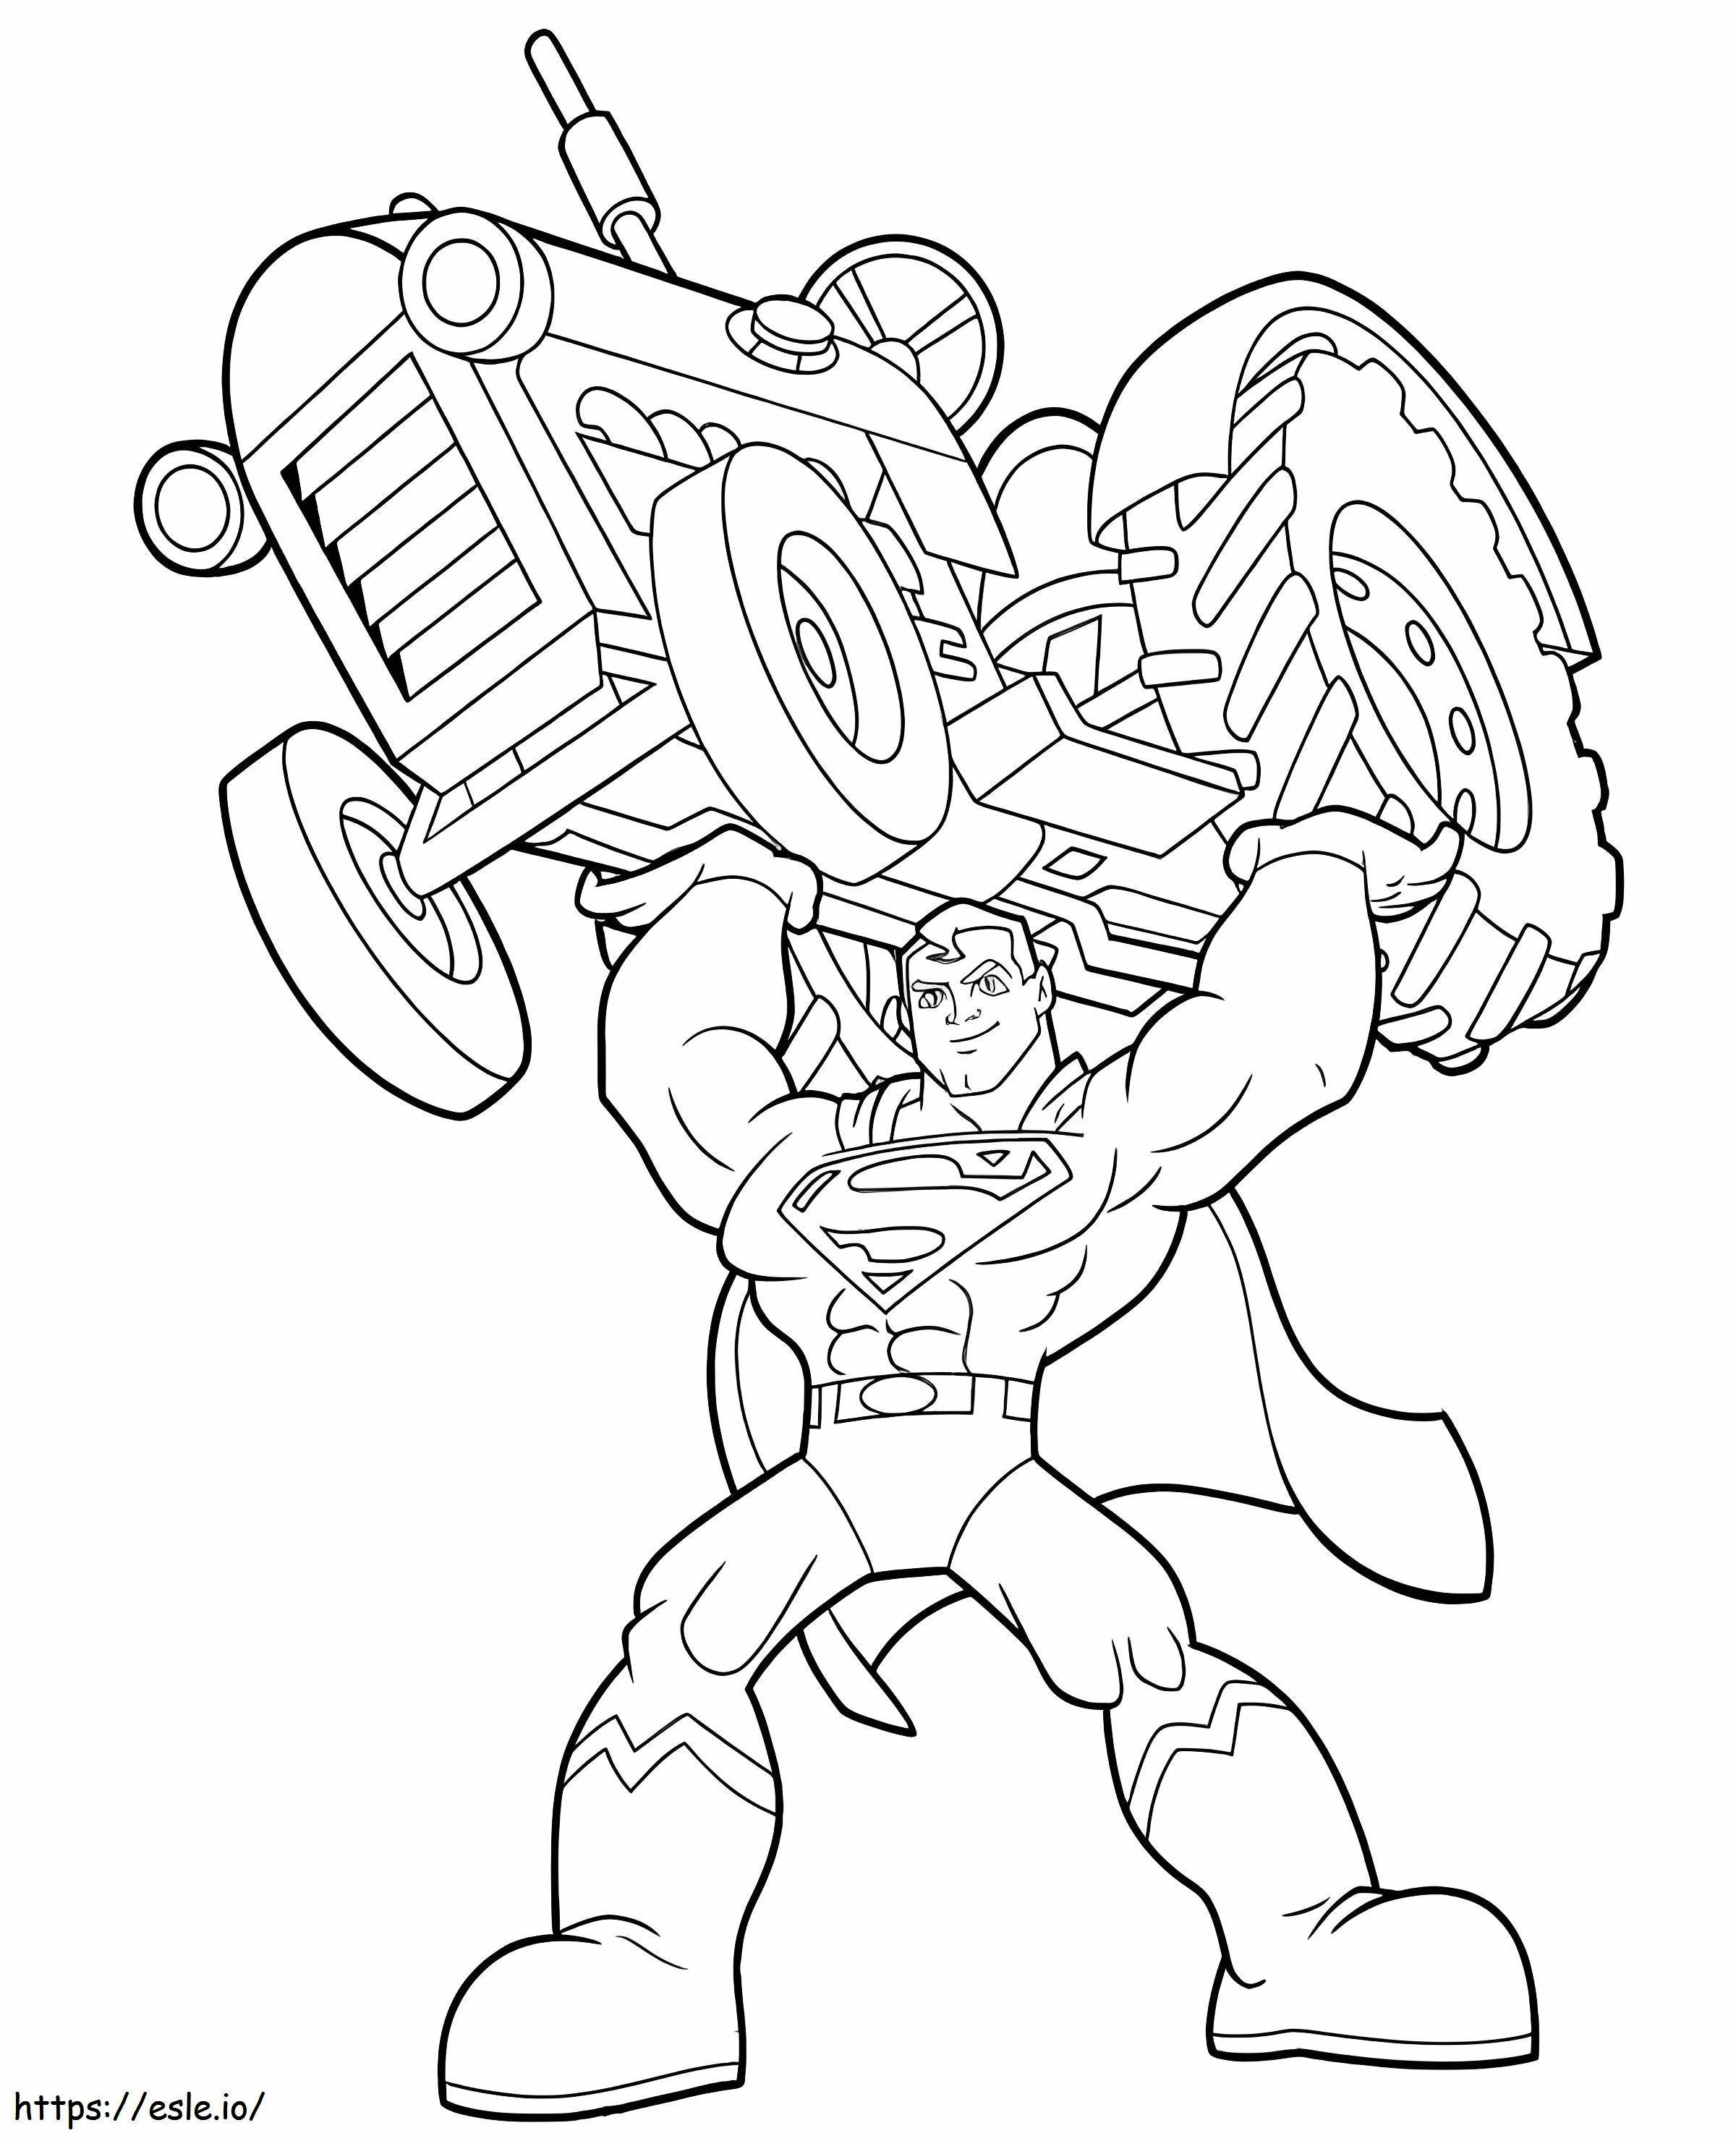 Superman Is Strong coloring page